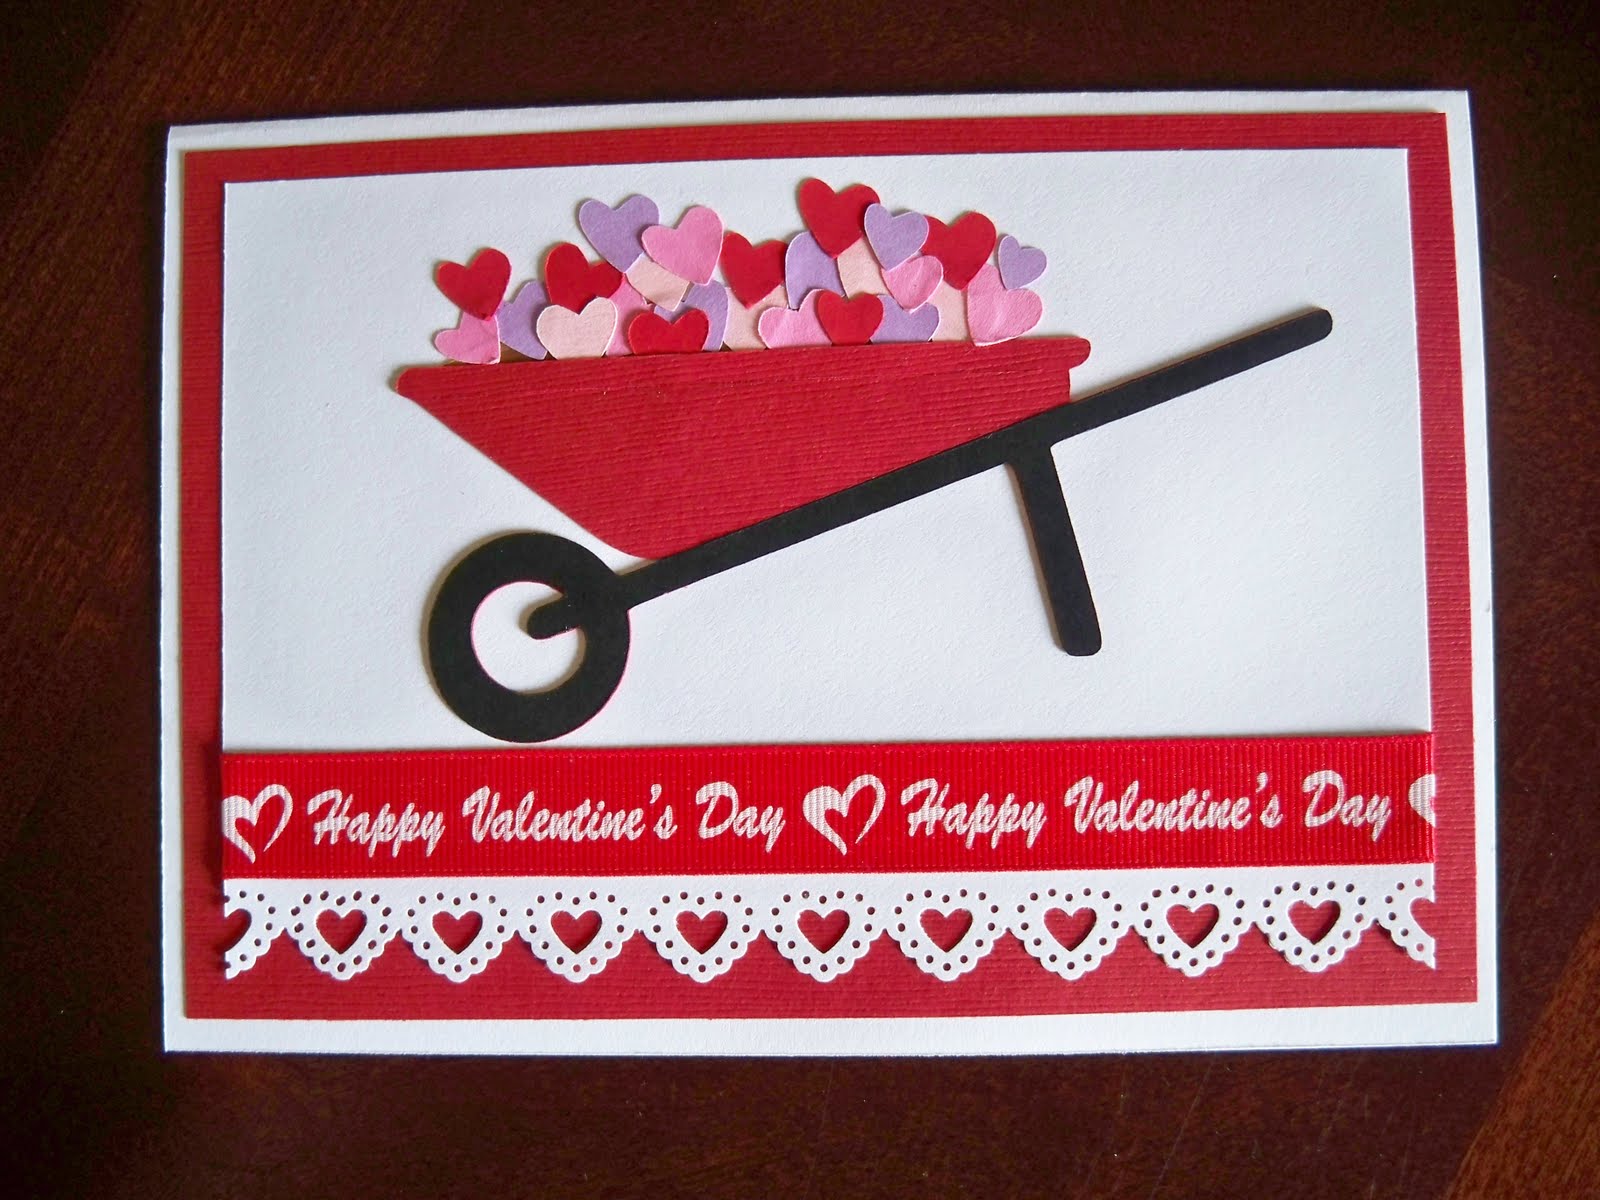 lena-s-creations-valentine-cards-for-family